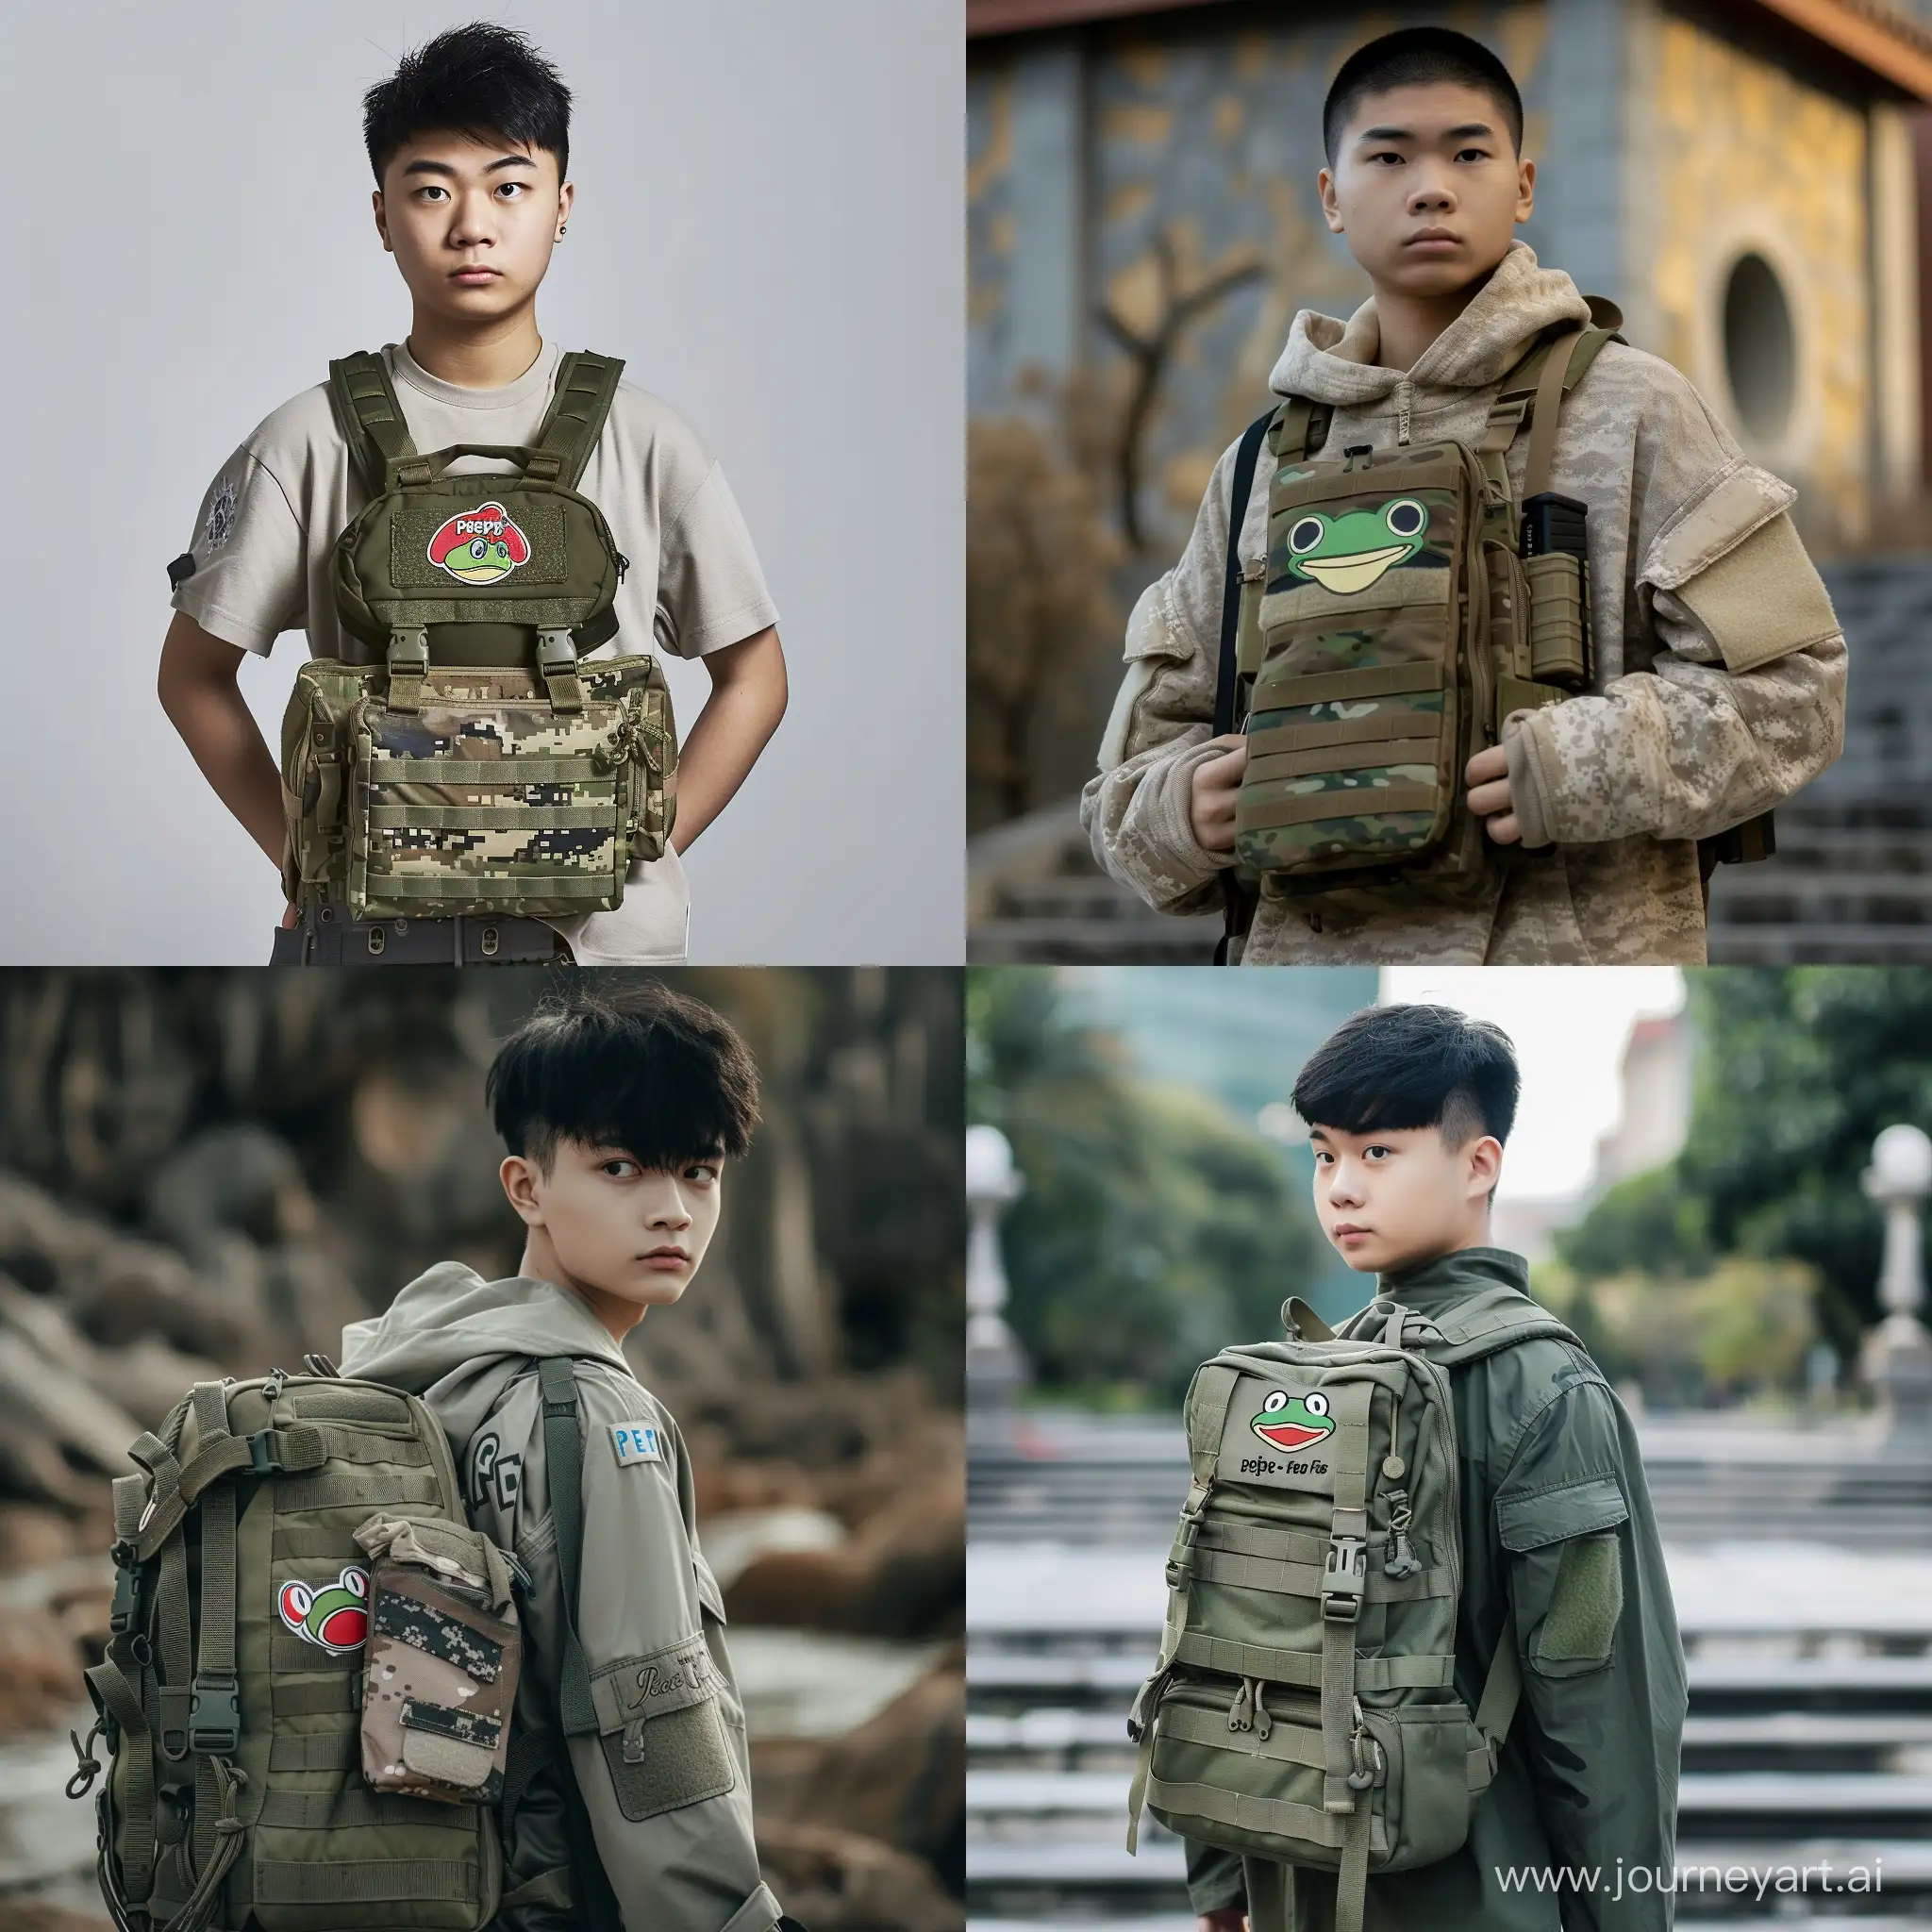  Young asian male, wearing casual clothes, with a military pack, with Pepe the frog logo